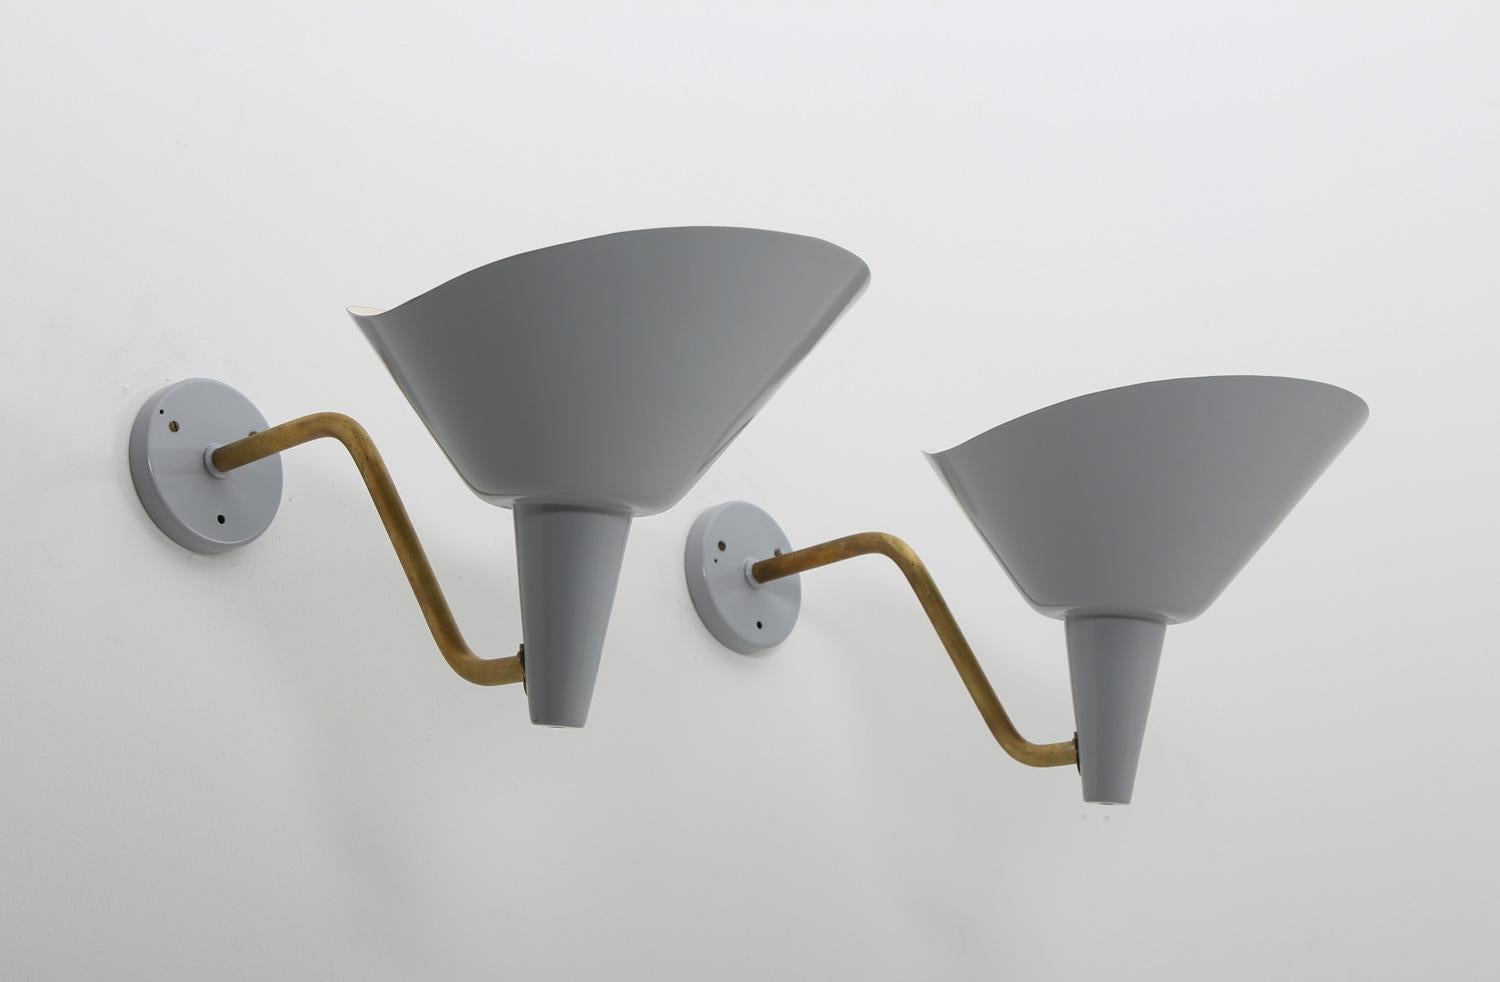 Rare wall lamps by Hans Bergström for Ateljé Lyktan, Sweden.
These lamps are great examples of the impressive design that characterize Swedish lighting in the 1930s-1940s. With these amazing proportions and shapes, Hans Bergström shows that he was